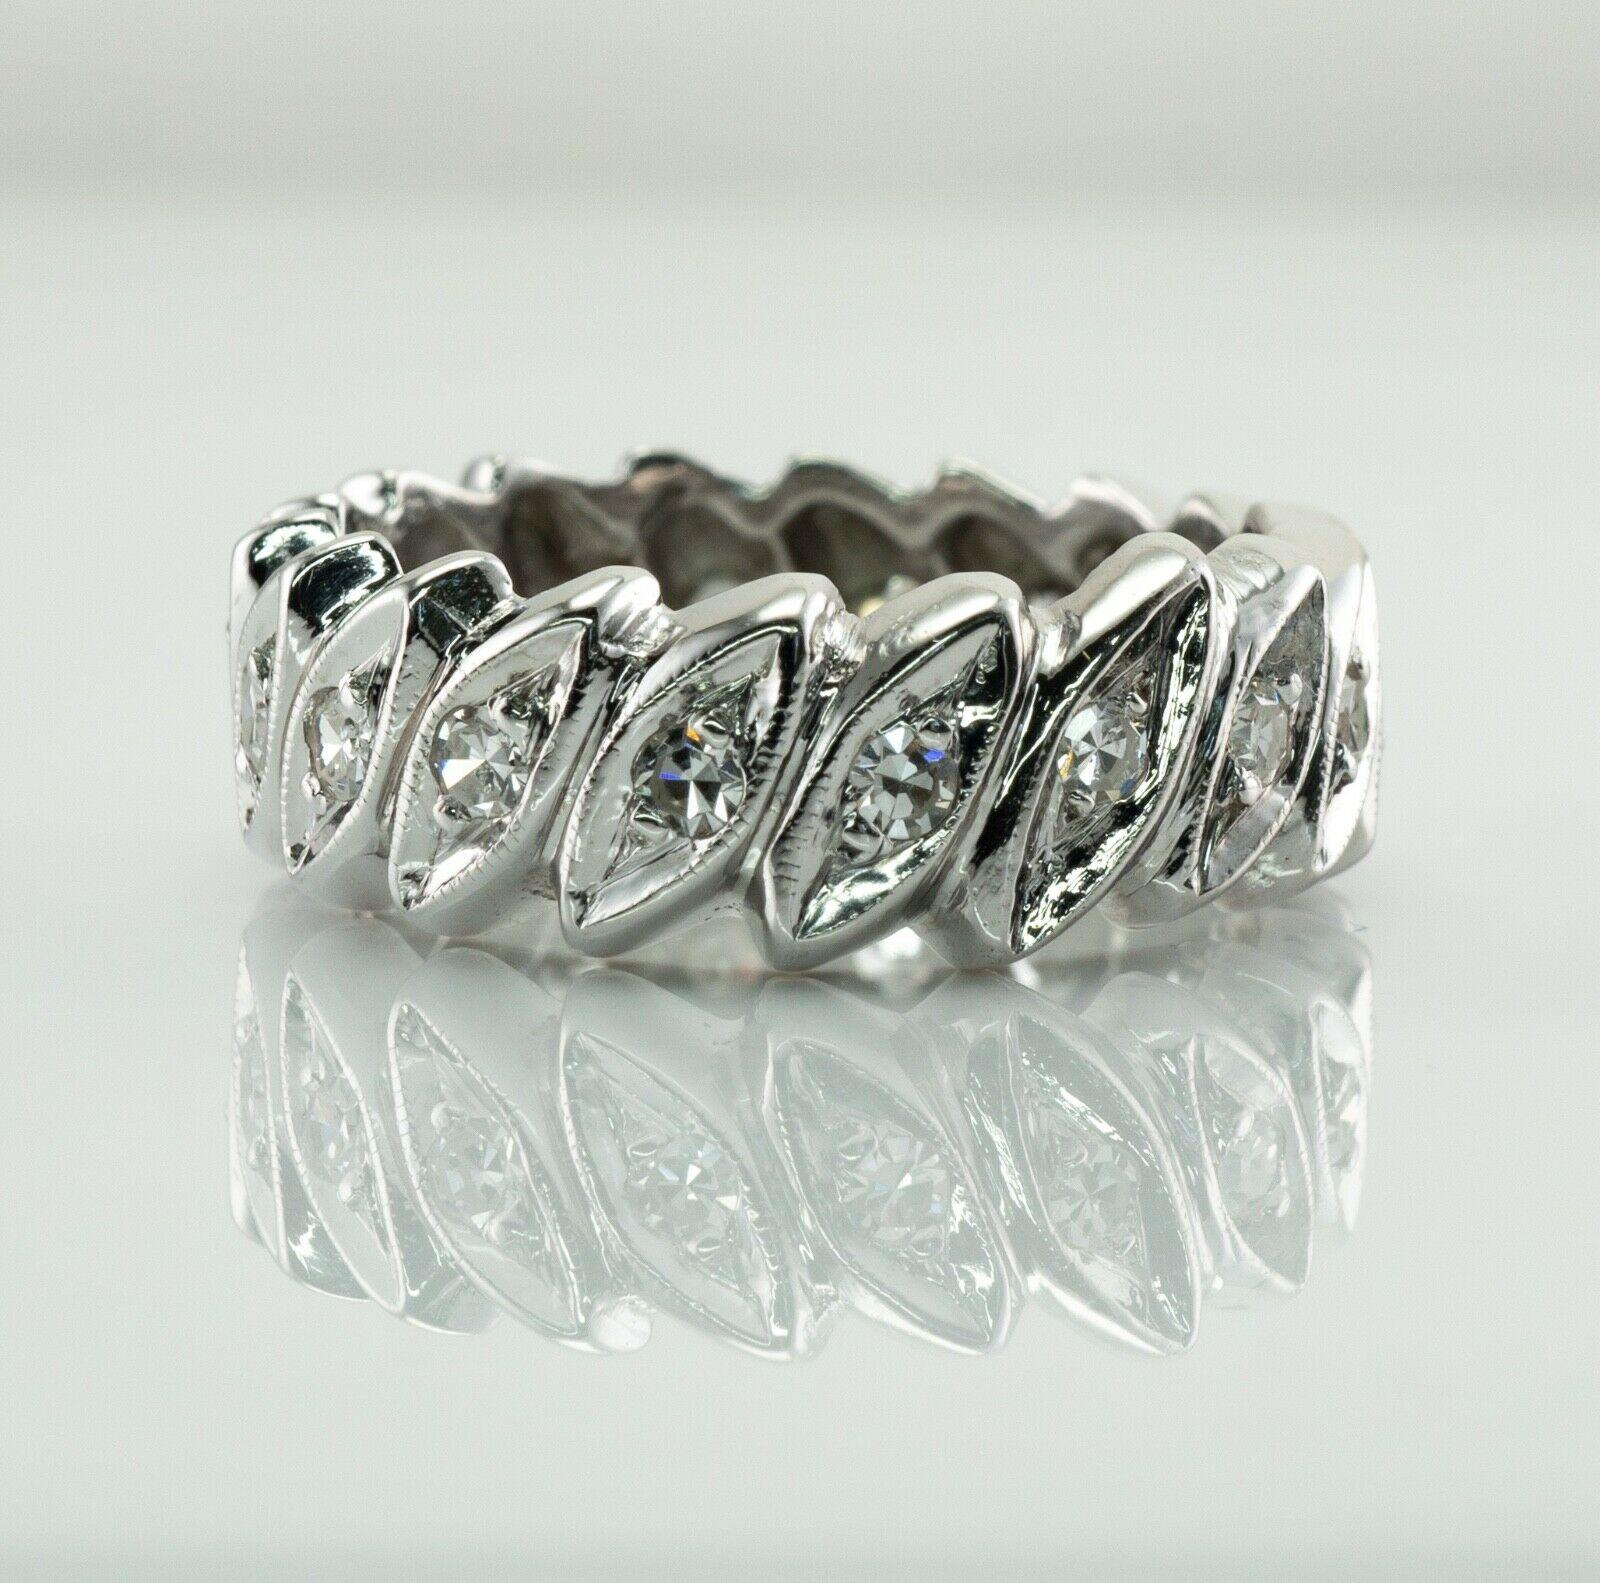 Eternity Diamond Ring 14K White Gold Band Single Cut .90 TDW

This vintage eternity band is finely crafted in solid 14K White Gold (carefully tested and guaranteed). Eighteen single cut diamonds go all around, no beginning, no end. The diamonds are